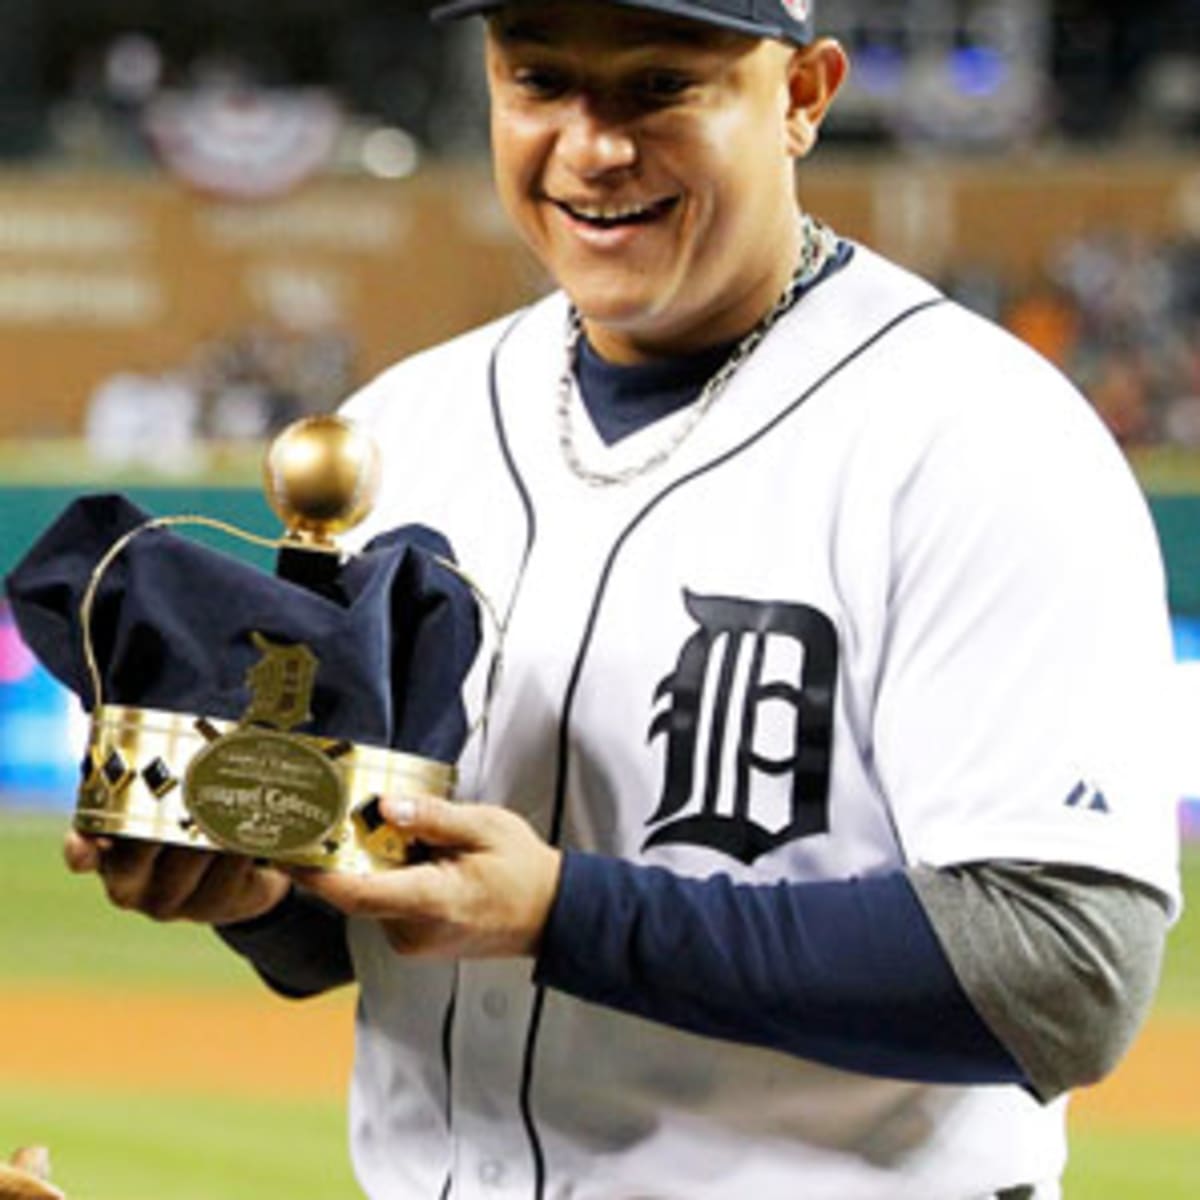 Everything you need to know about Miguel Cabrera's triple crown